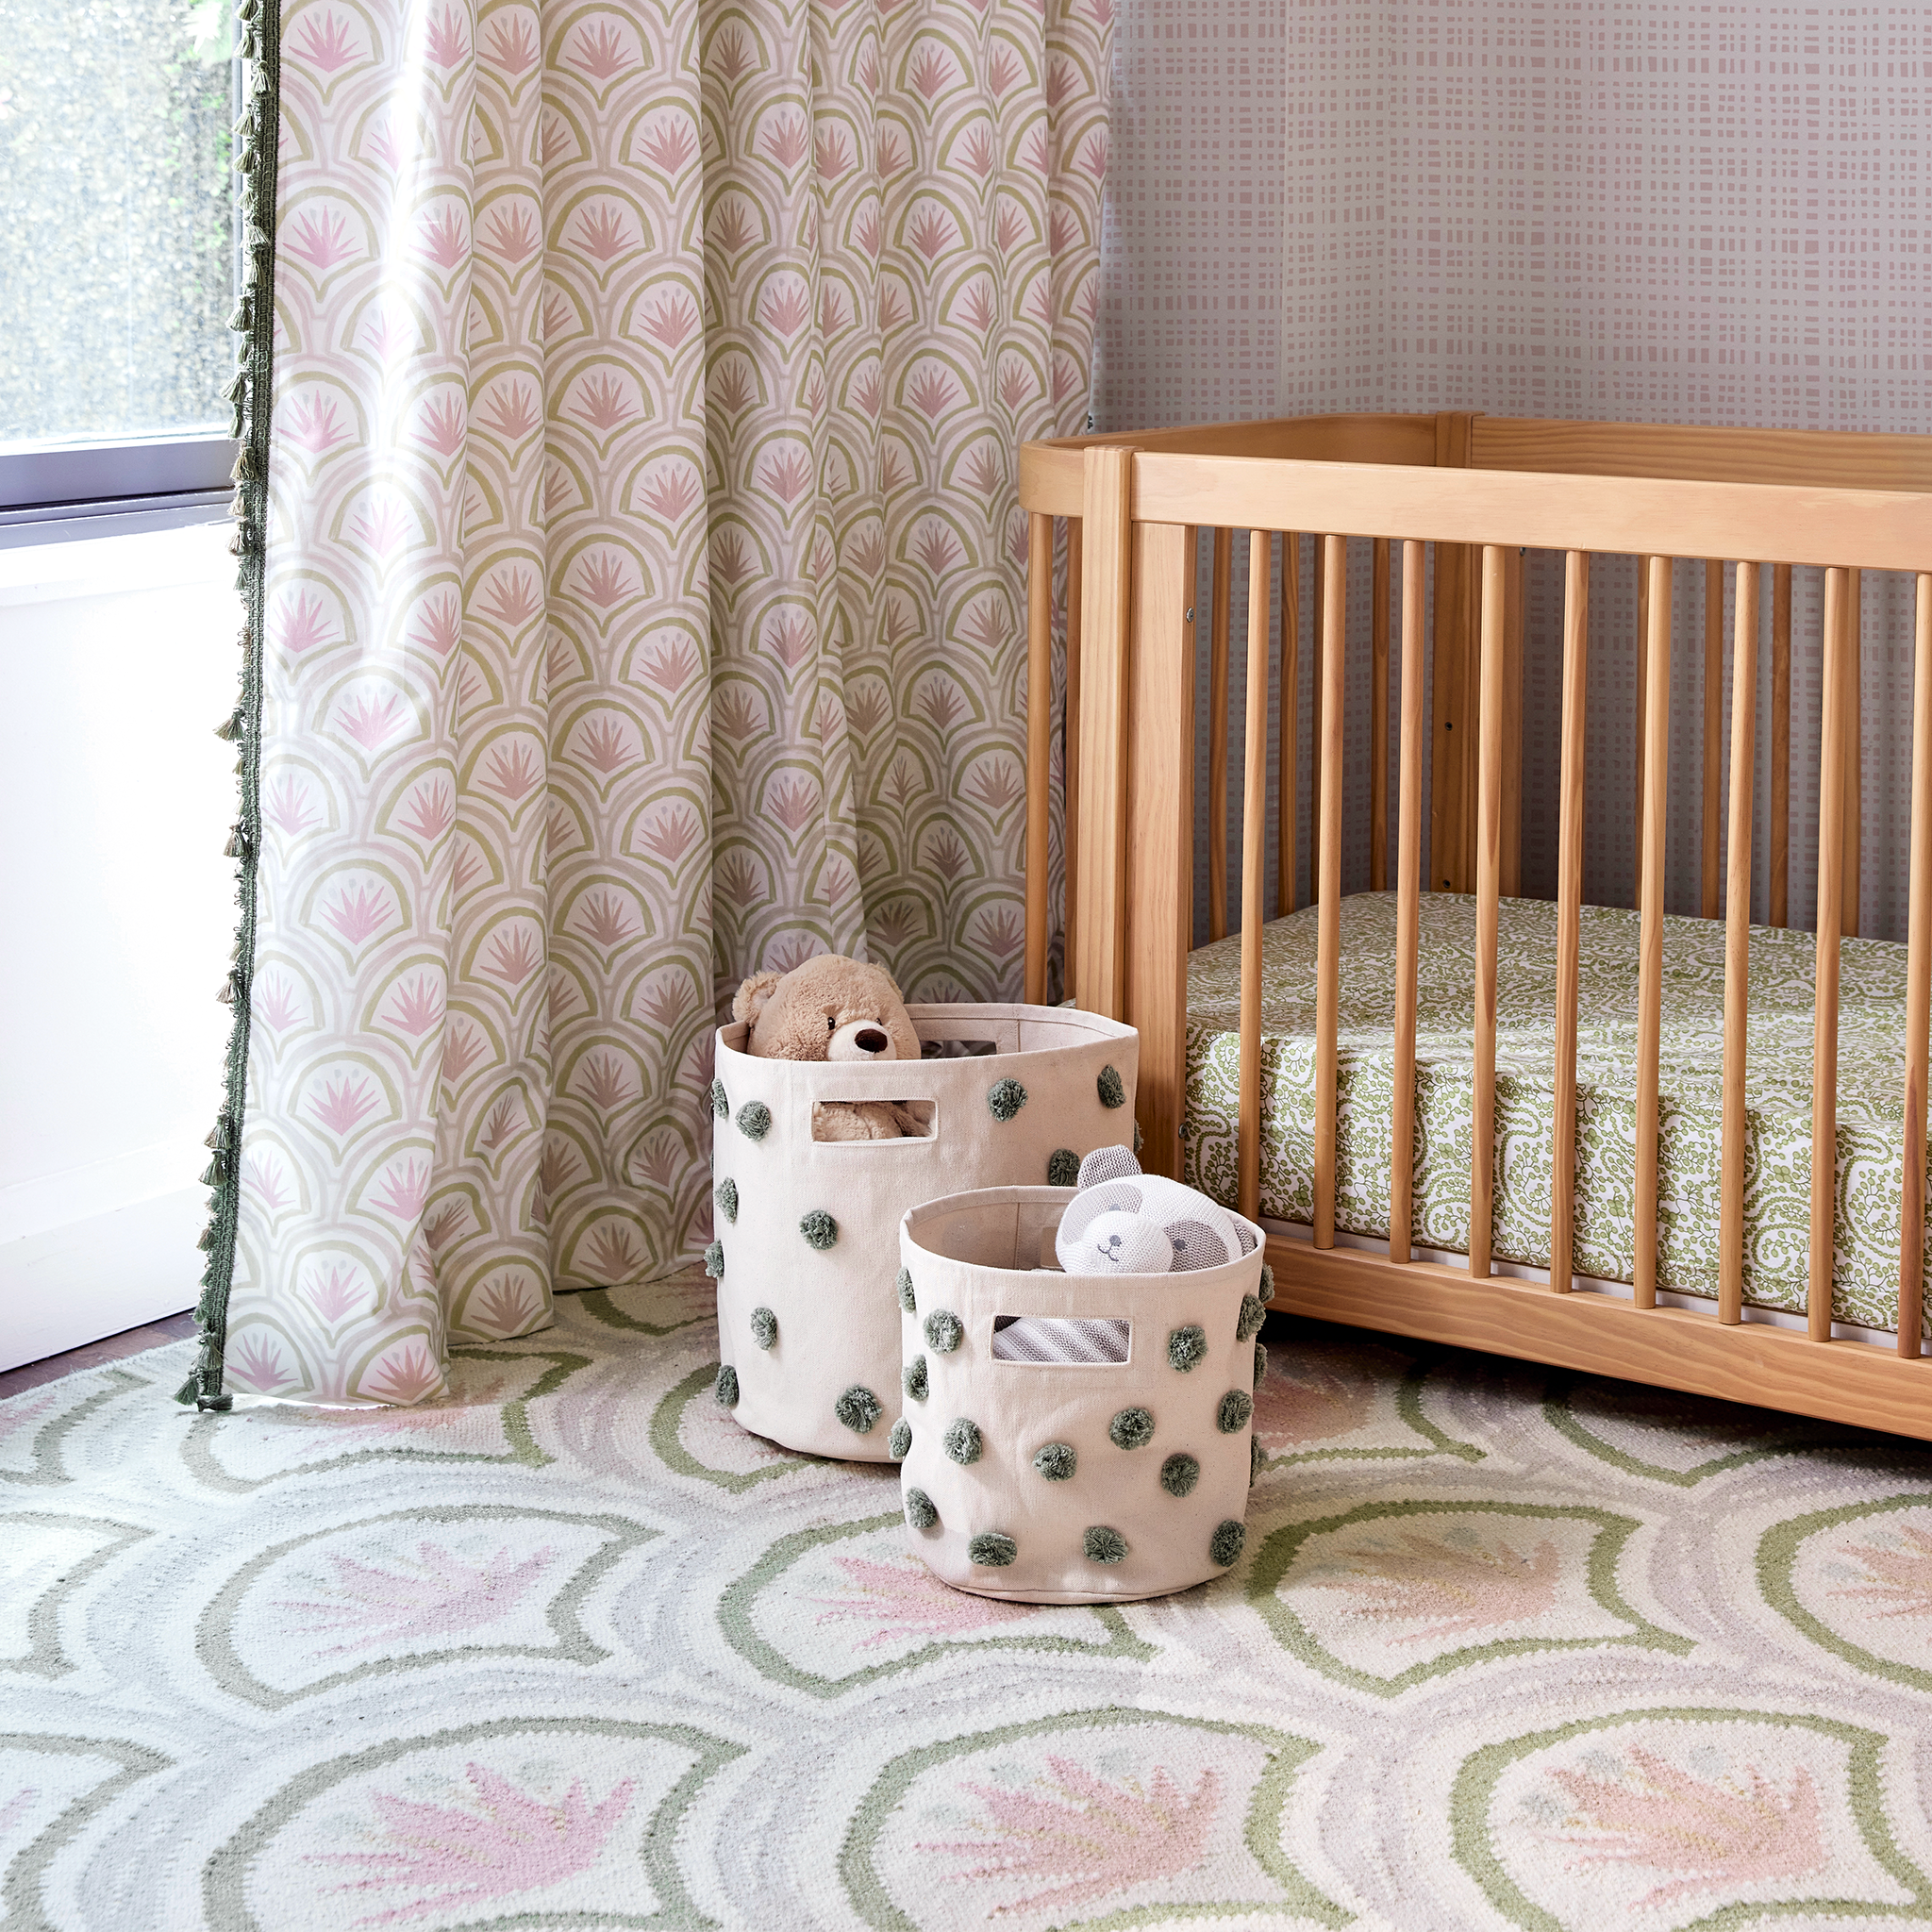 Pink and green art deco palm custom curtain hanging on a window next to a wooden crib and white toy baskets on a pink palm dhurrie rug